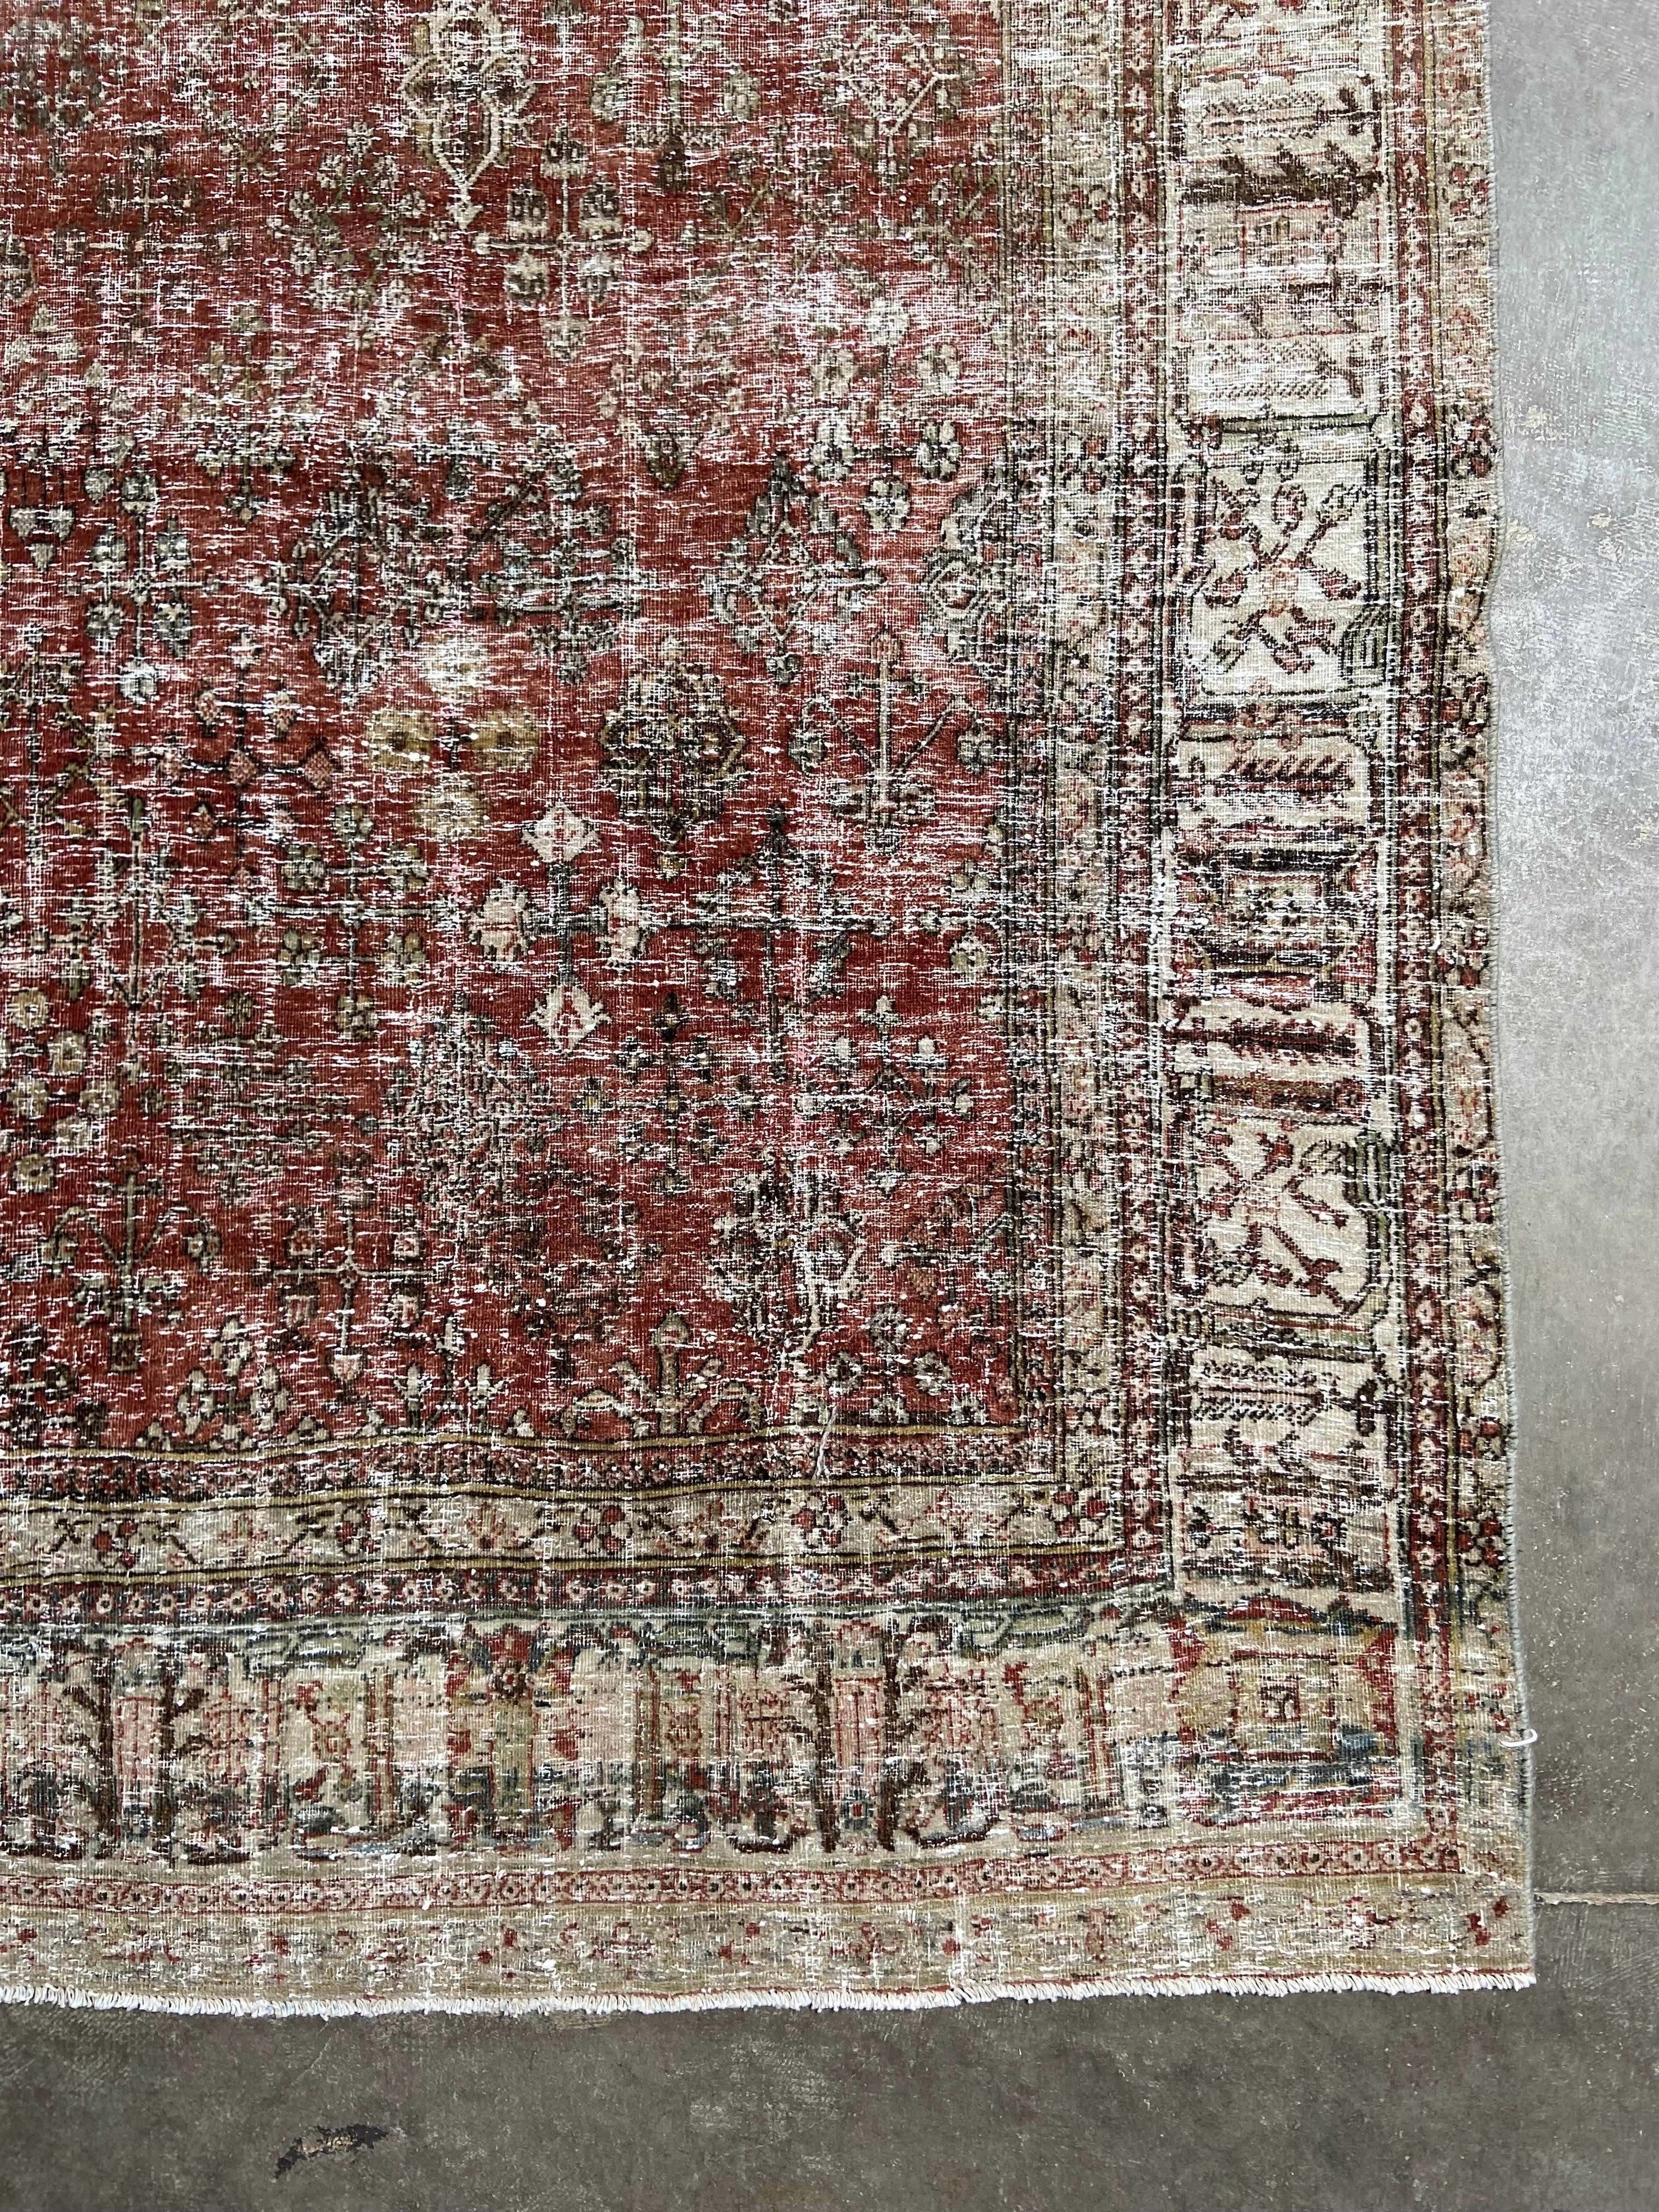 Vintage Turkish Tabriz rug 
Size: 10’ 6” x 7’ 
A beautiful and mesmerizing vintage Tabriz rug with a geometric pattern center, with amidst a tightly woven field of geometric shapes and patterns with flowers and surrounded by a wide border with